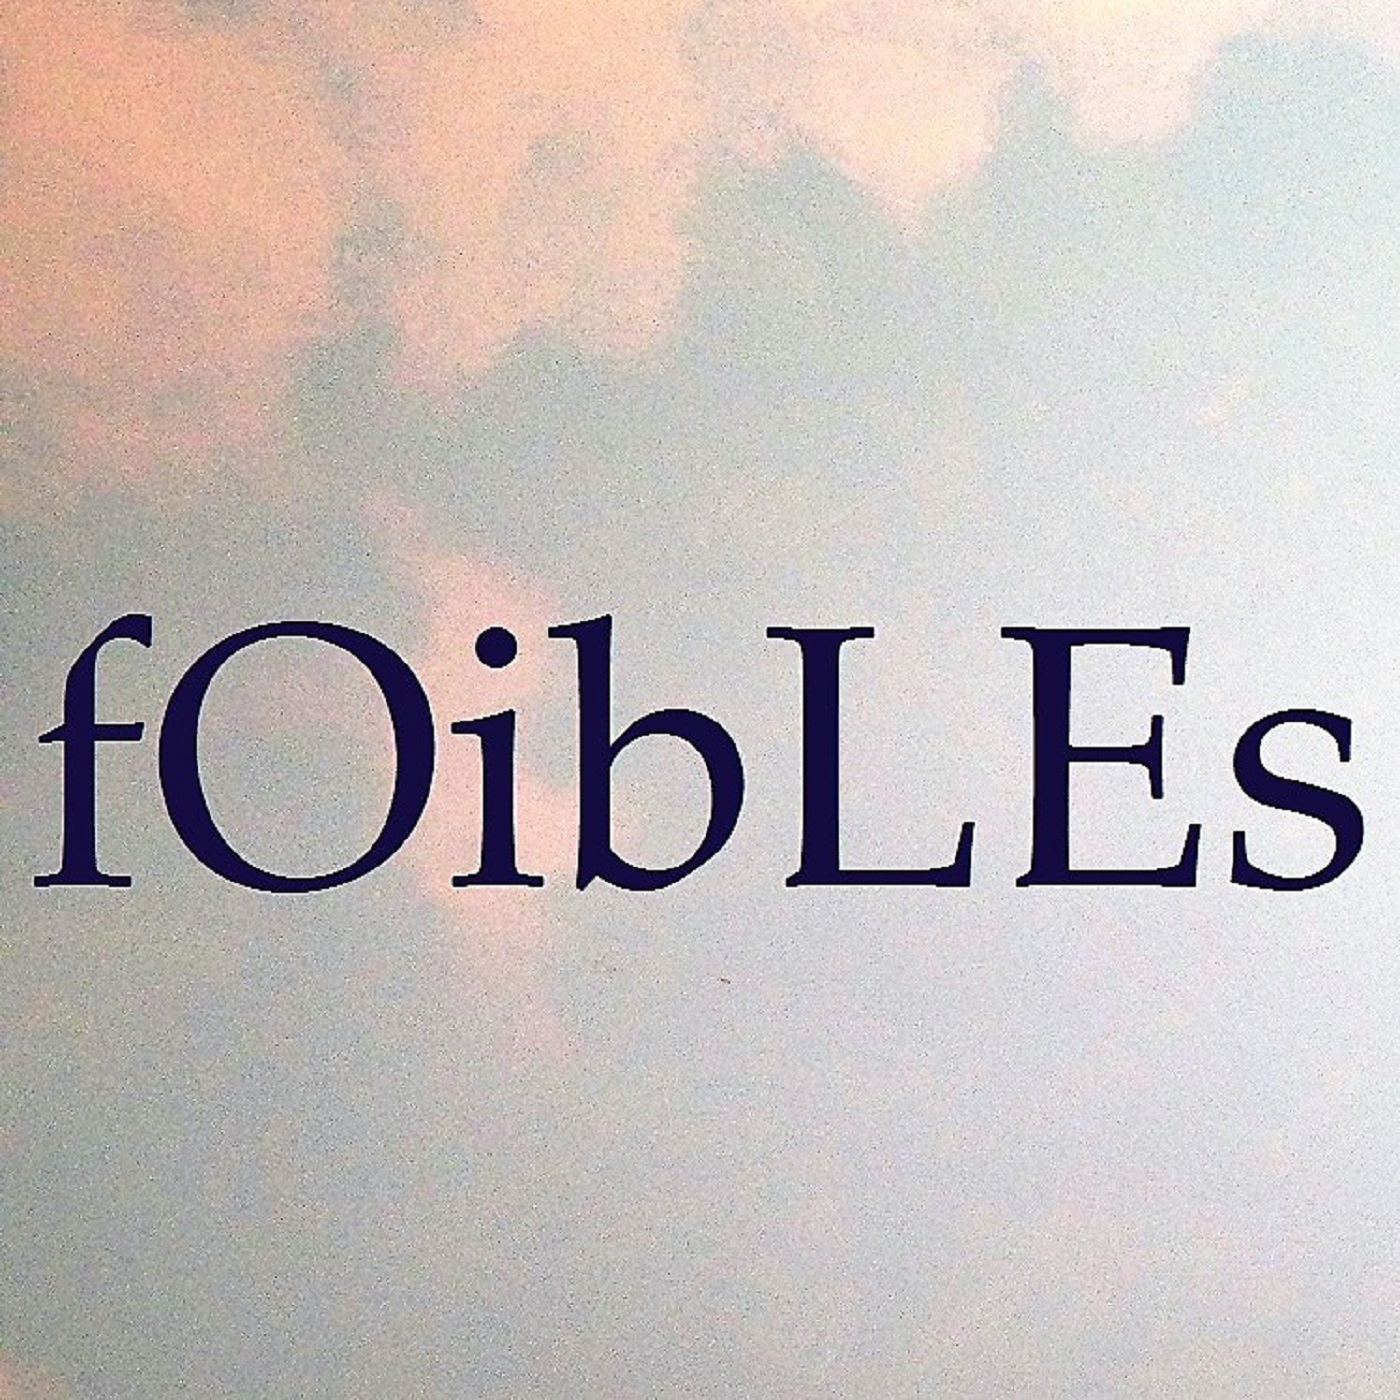 Foibles- Episode 4 Worst Things we Ever Tasted